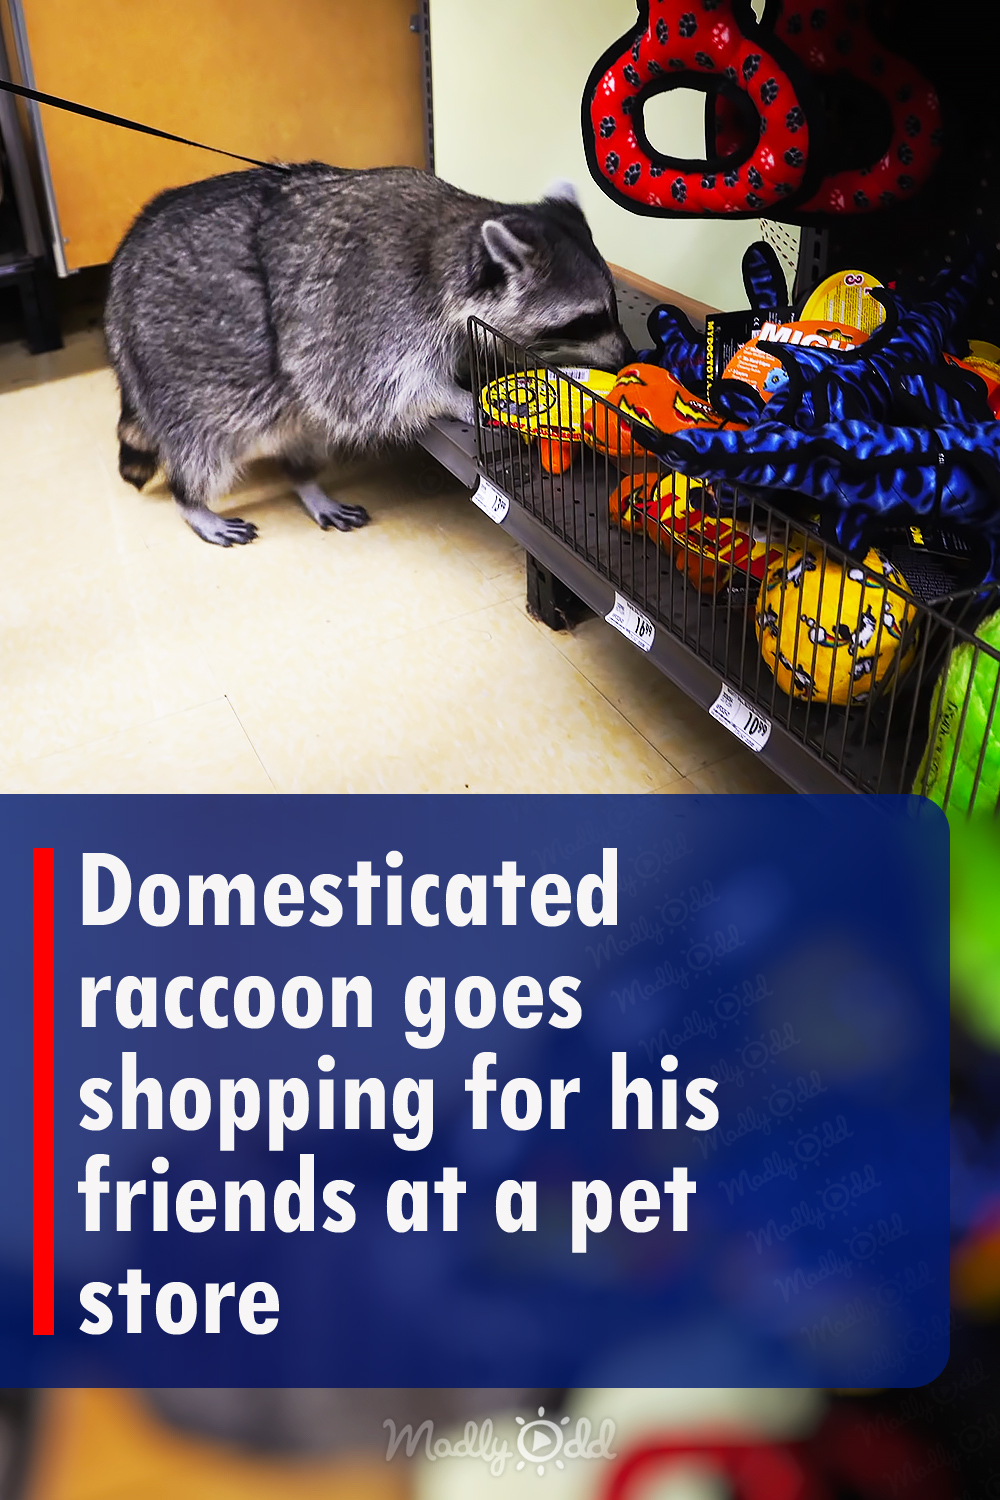 Domesticated raccoon goes shopping for his friends at a pet store